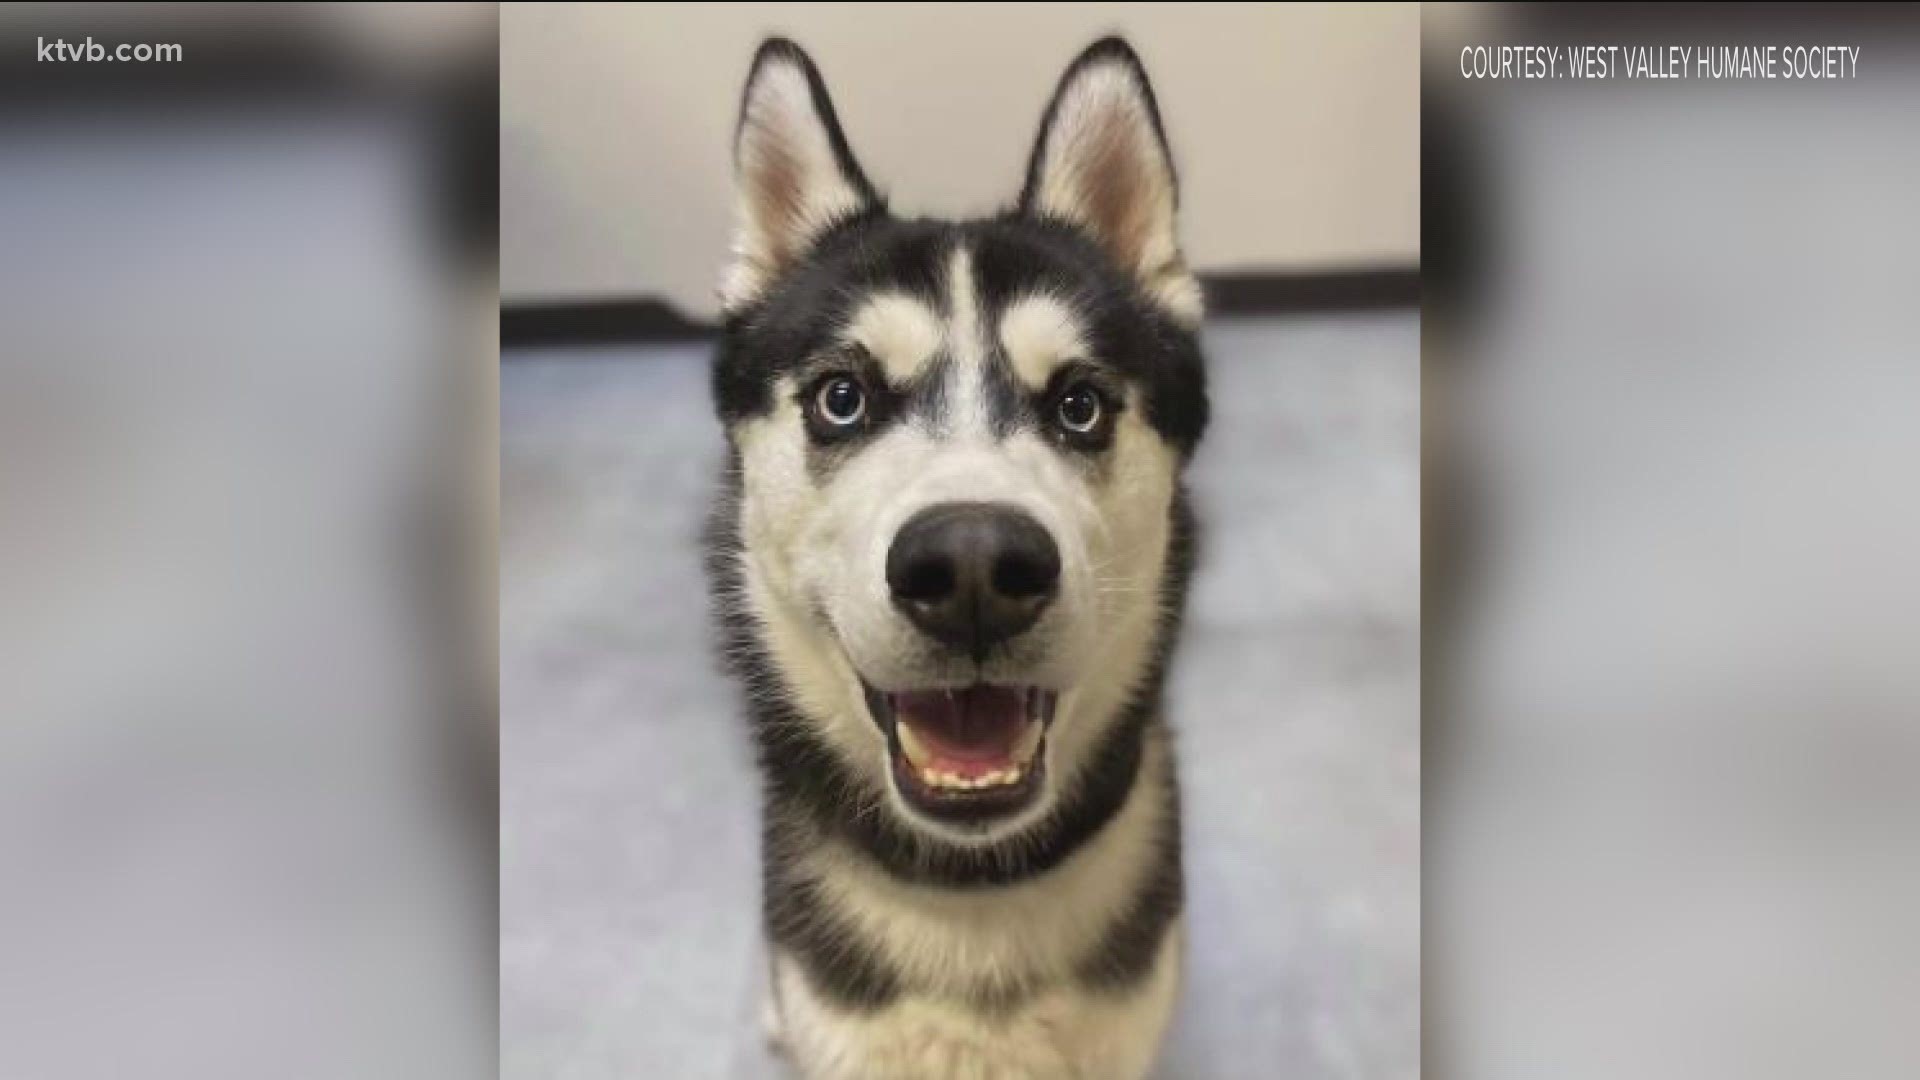 The shelter says they have enough huskies to fill out a dog sled team!